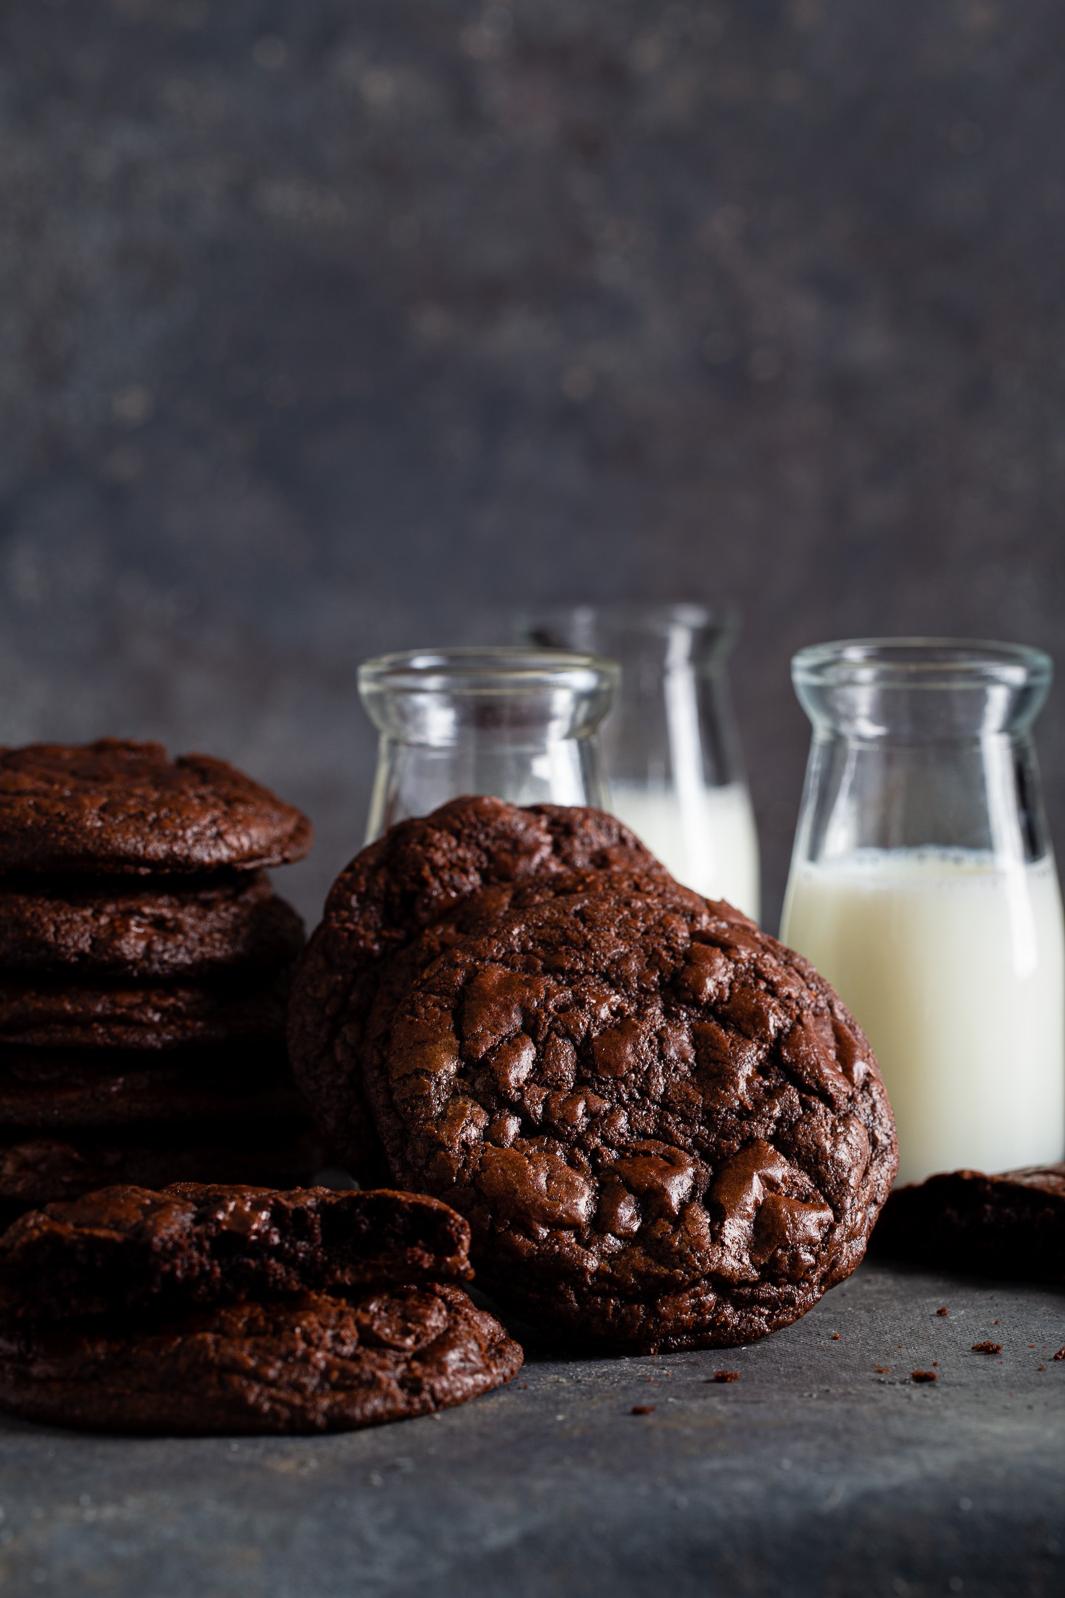  If you love coffee and chocolate, these cookies are a match made in heaven.